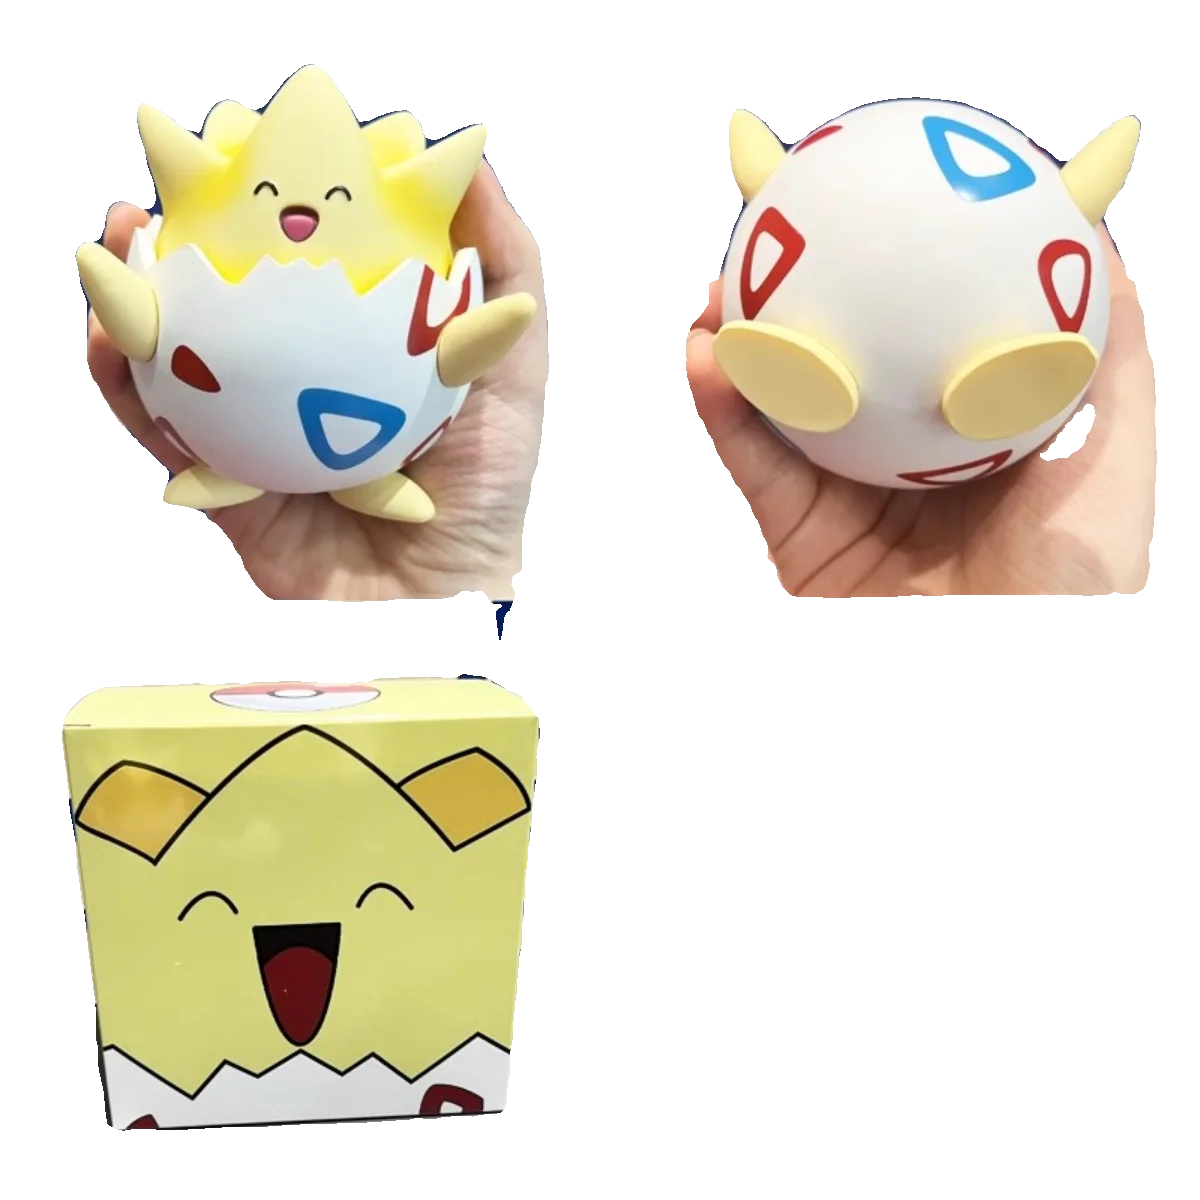 Anime Pokemon Togepi Figure GK Q Version Kawaii Cute Statue Pvc Action Figurine Collectible Model Toy Gift